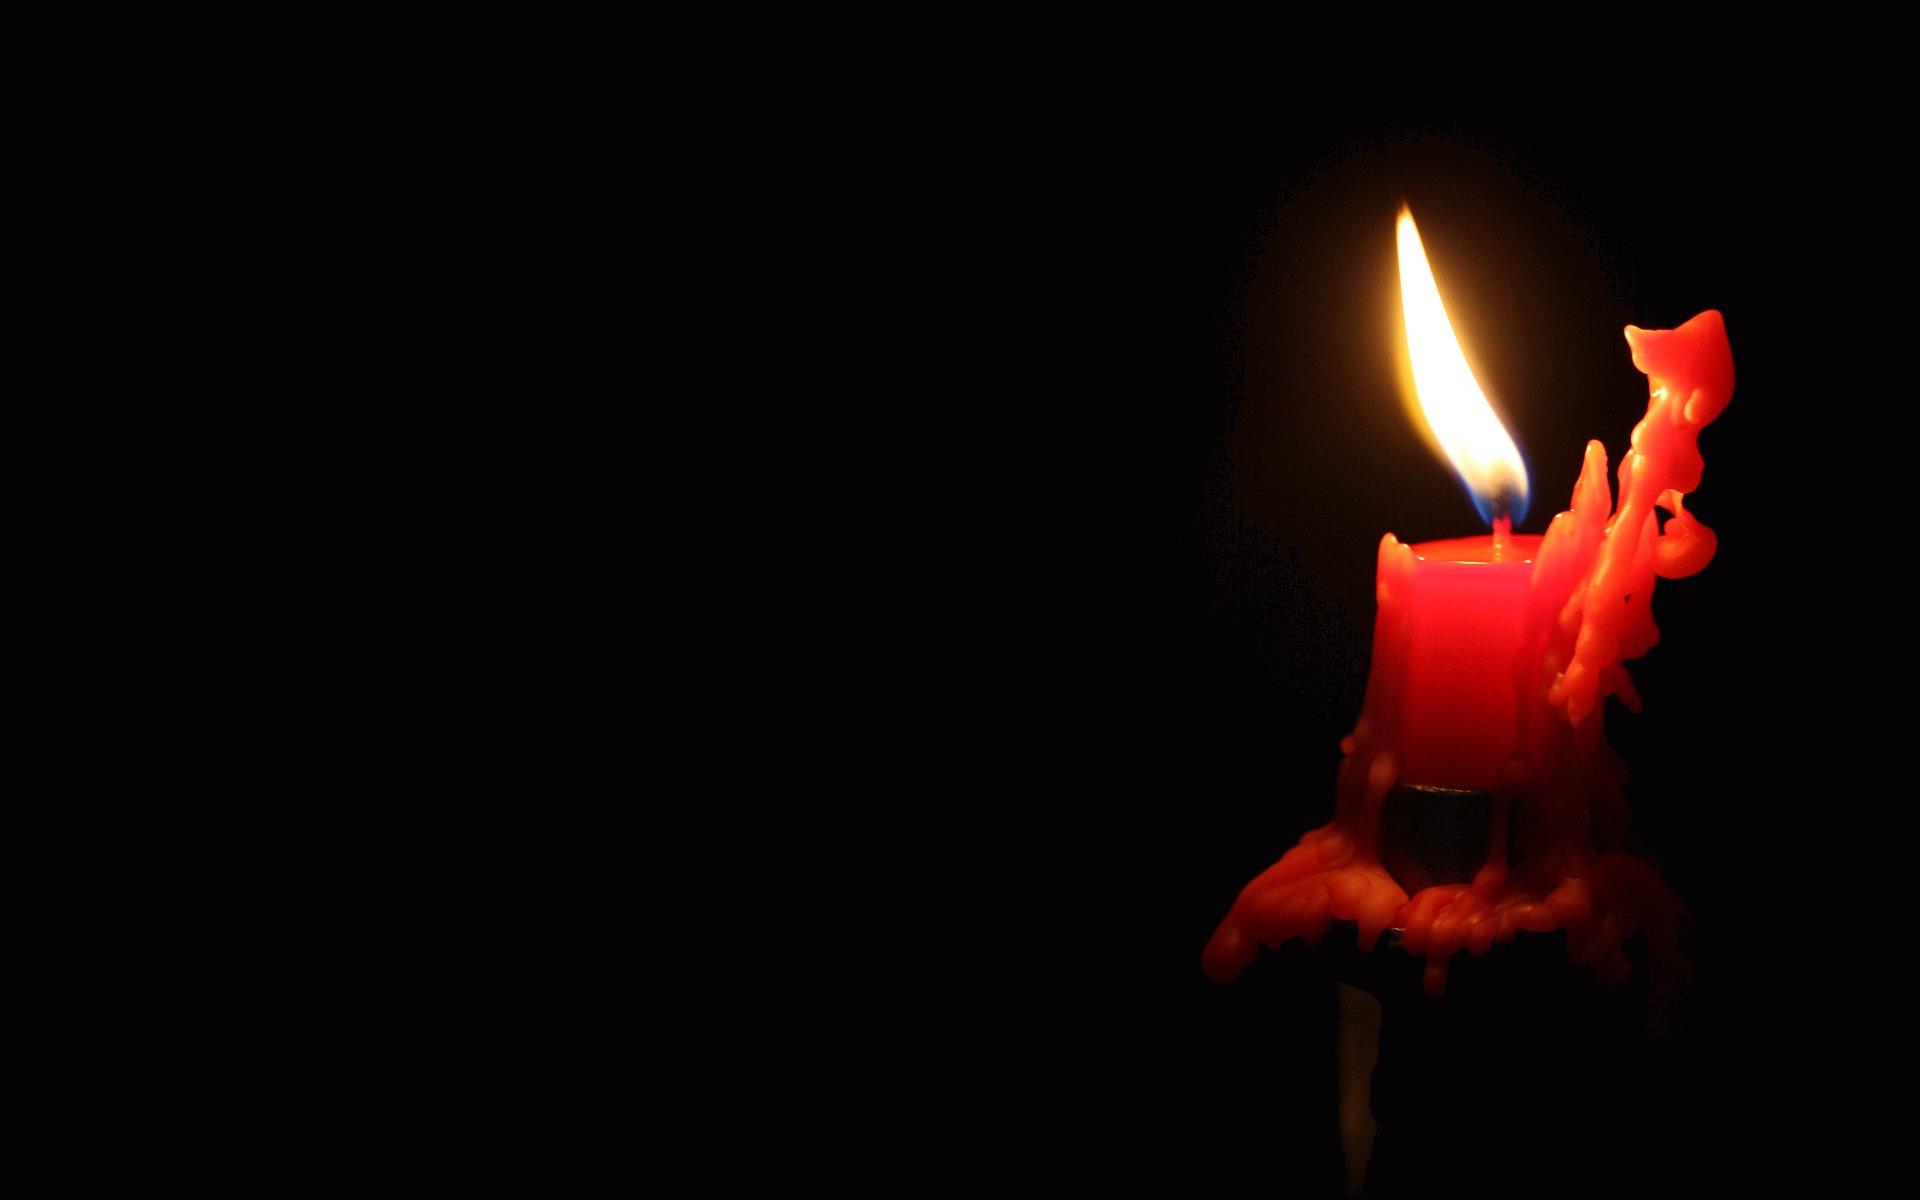 ws_Candle_1920x1200